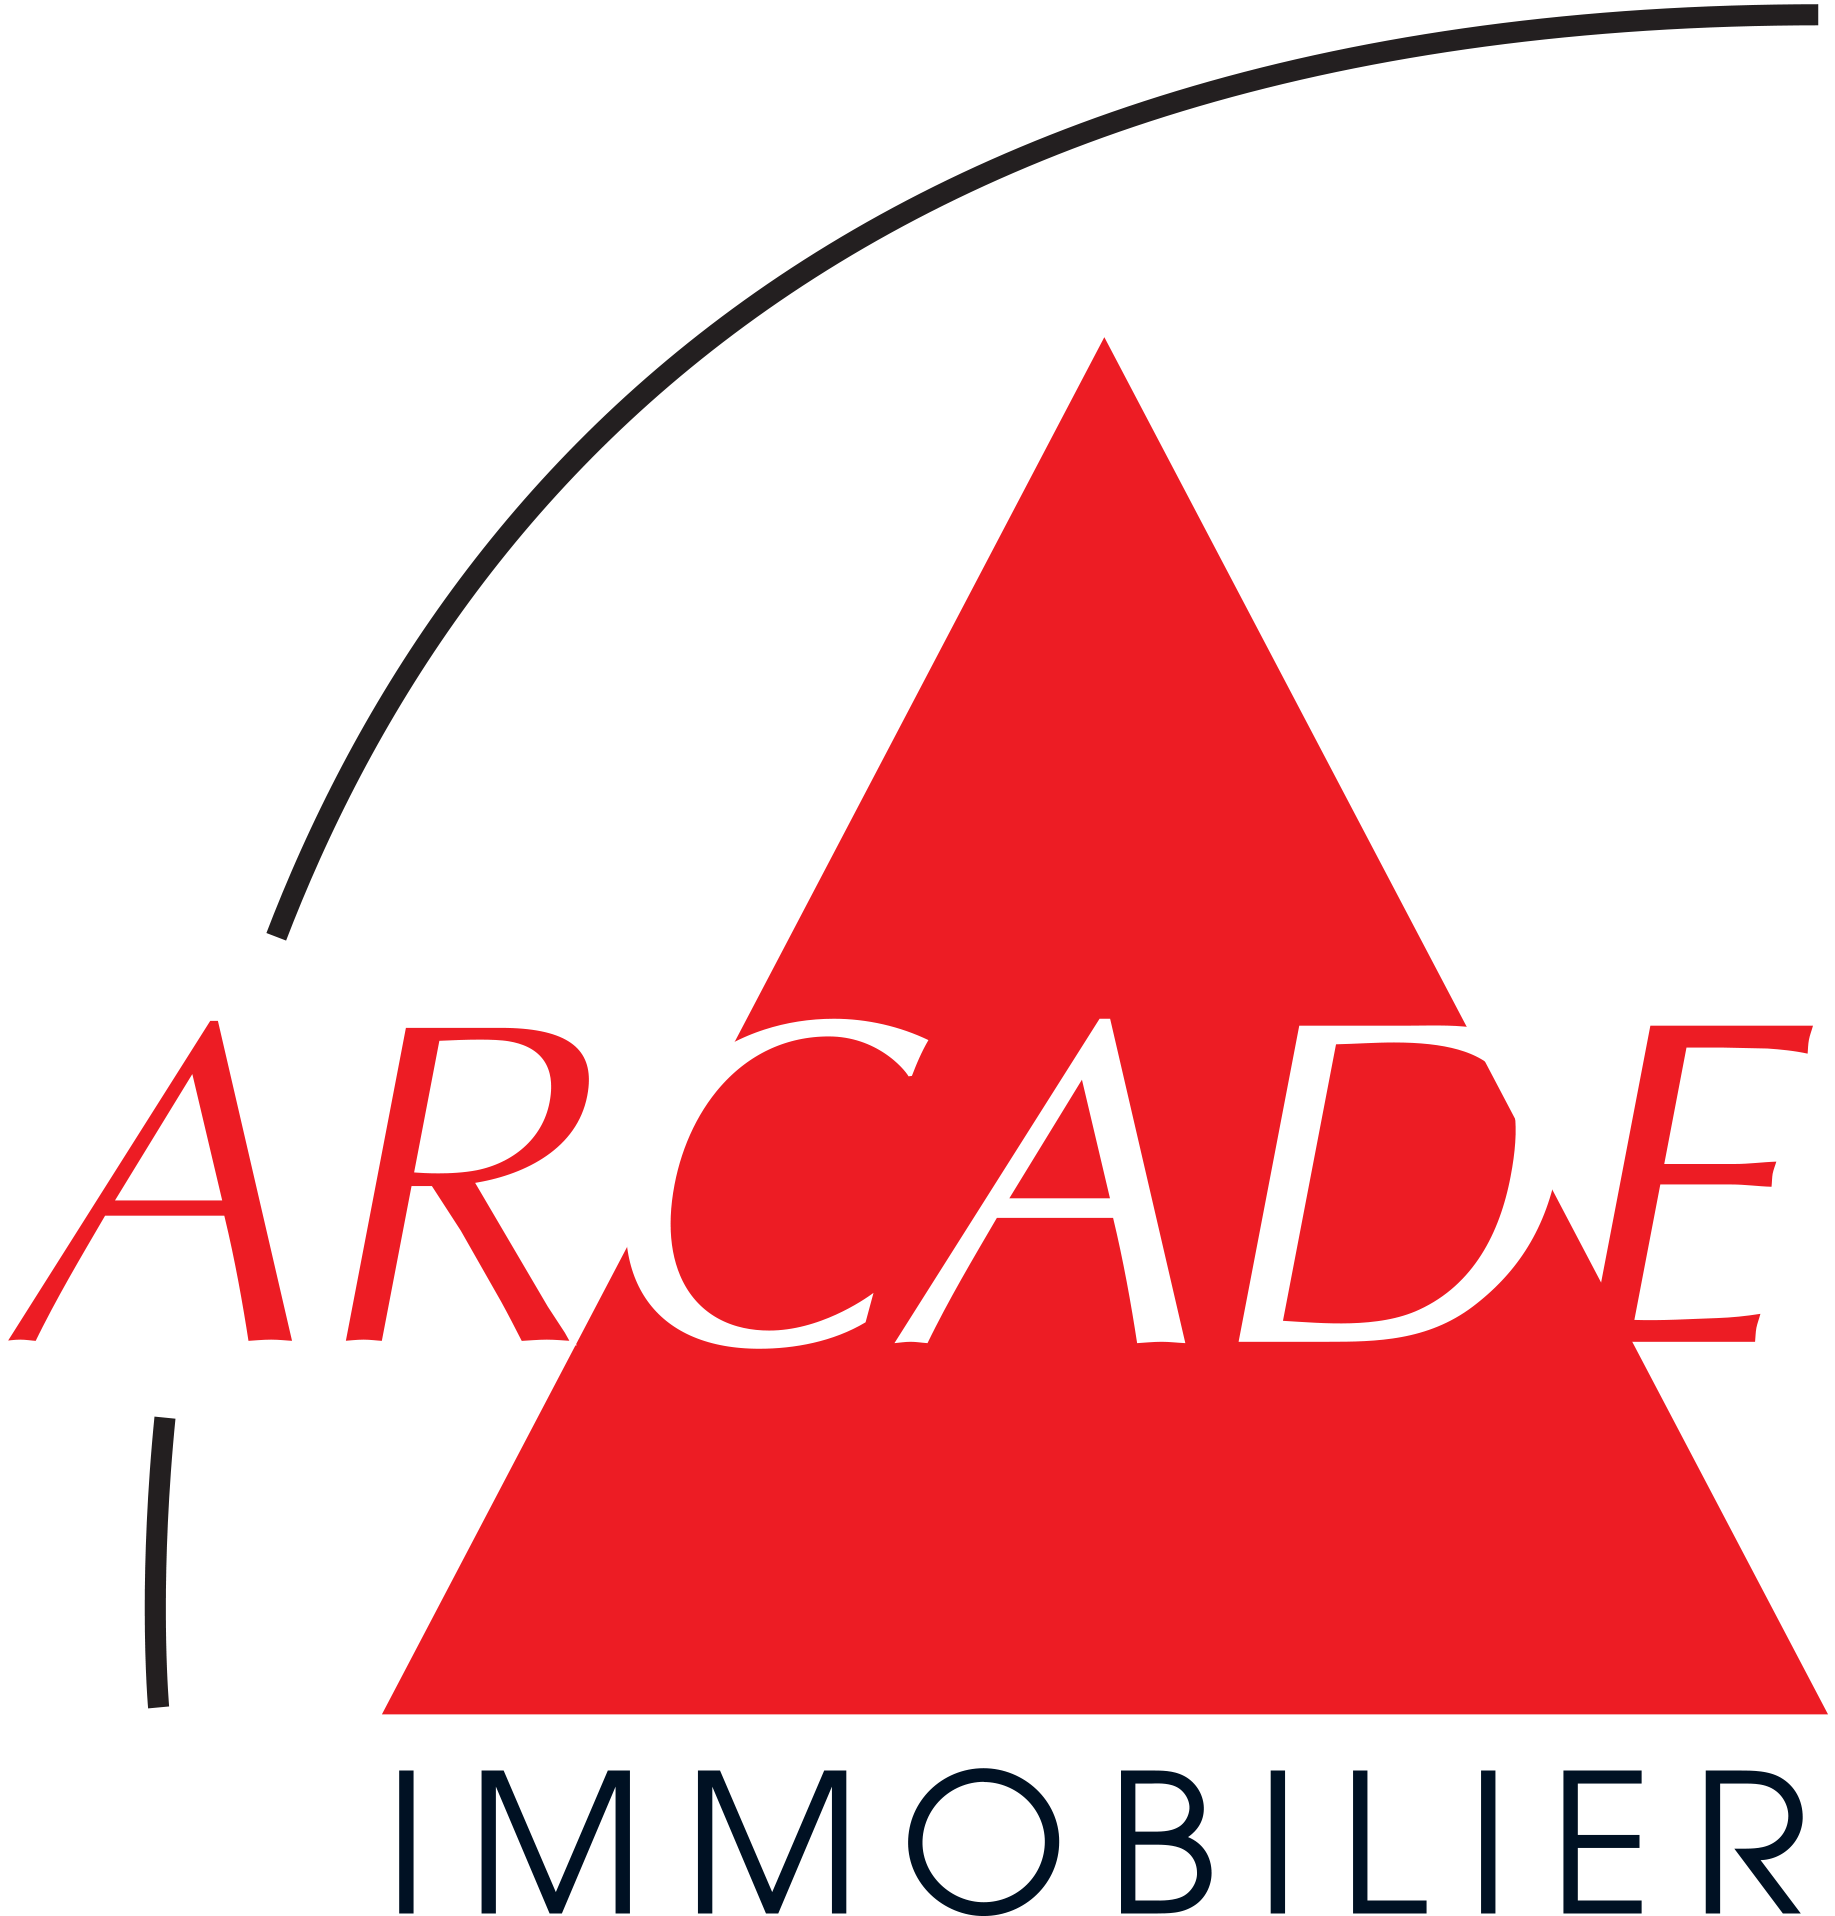 Arcade Immobilier